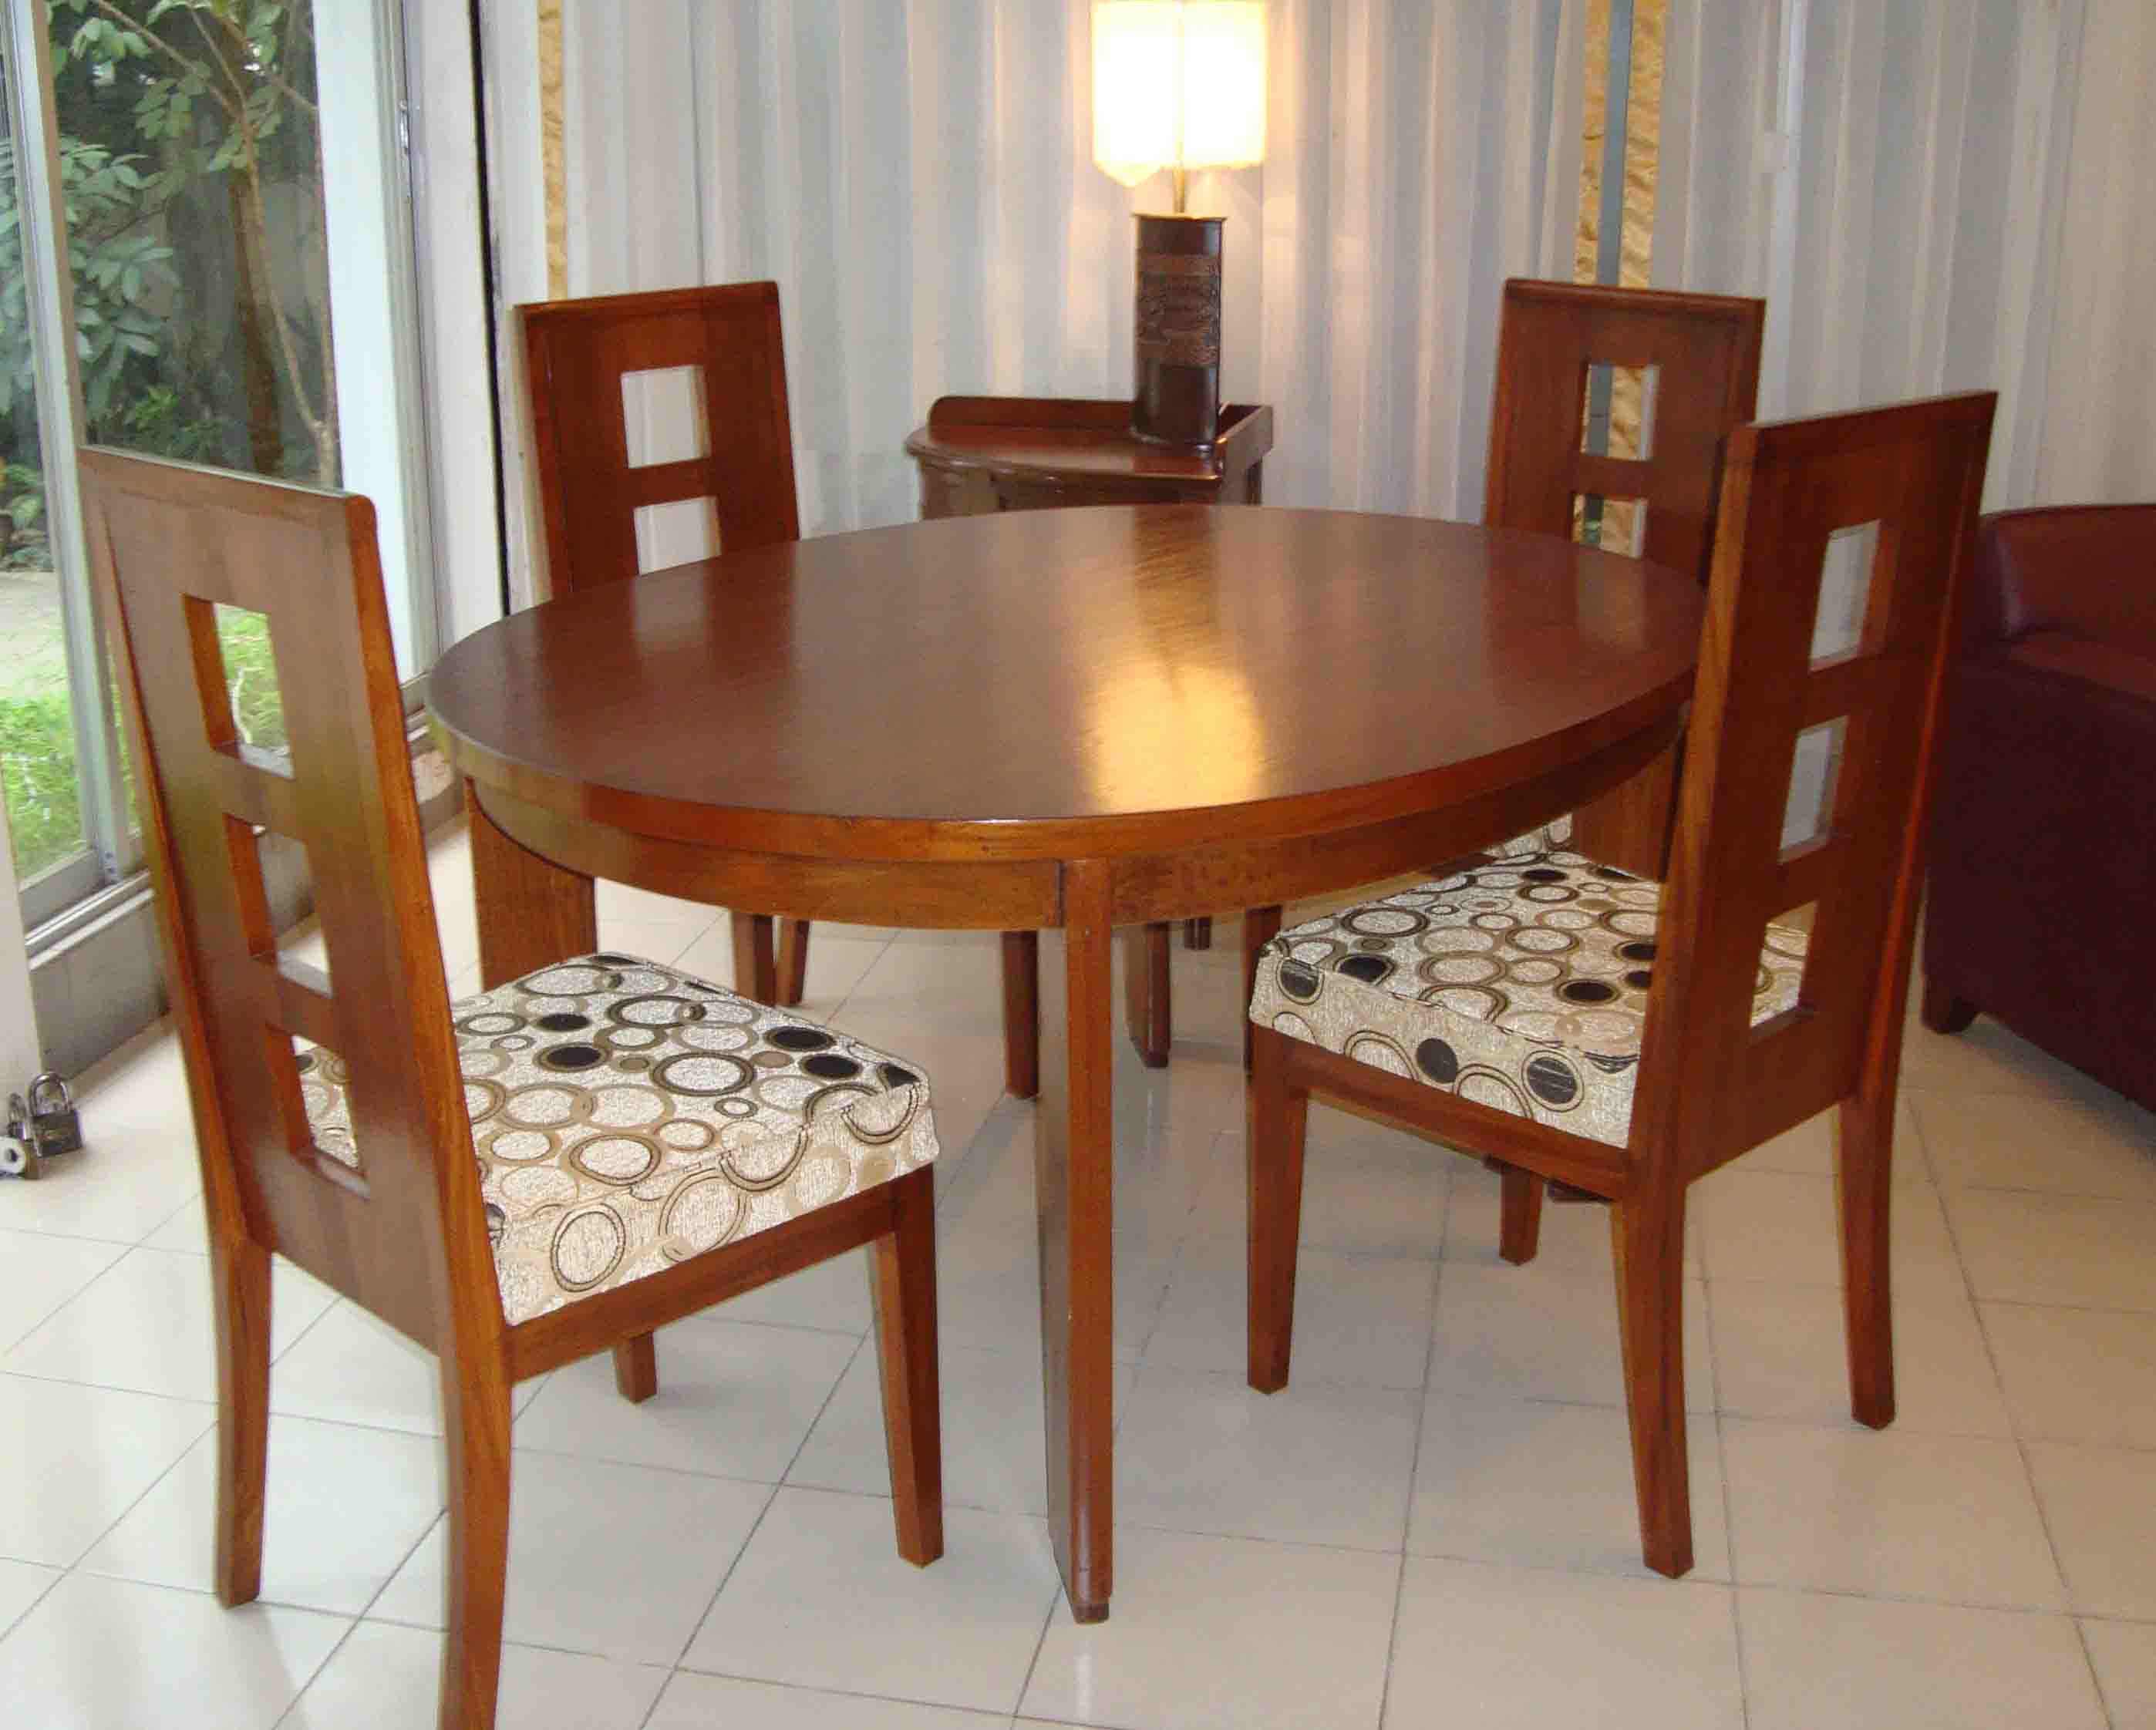 NZA - Dining table with 4 chairs made of solid wood. large image 0